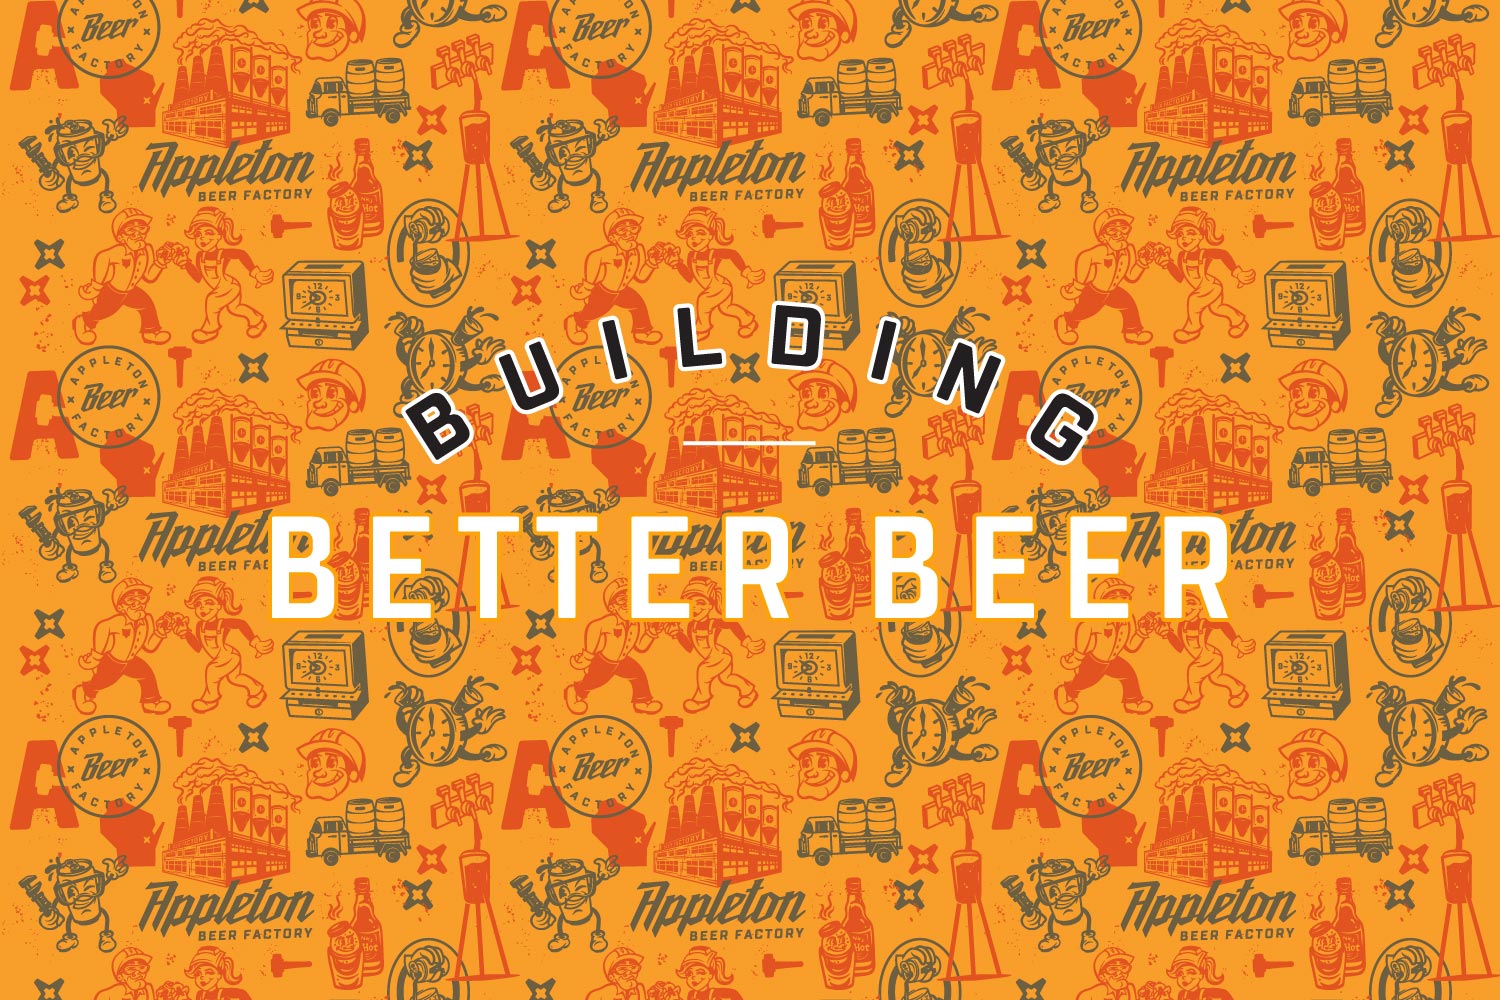 Marketing Slogan and Brand Pattern for Appleton Beer Factory by Hype Visual, Wisconsin logo design, illustration and brand identity